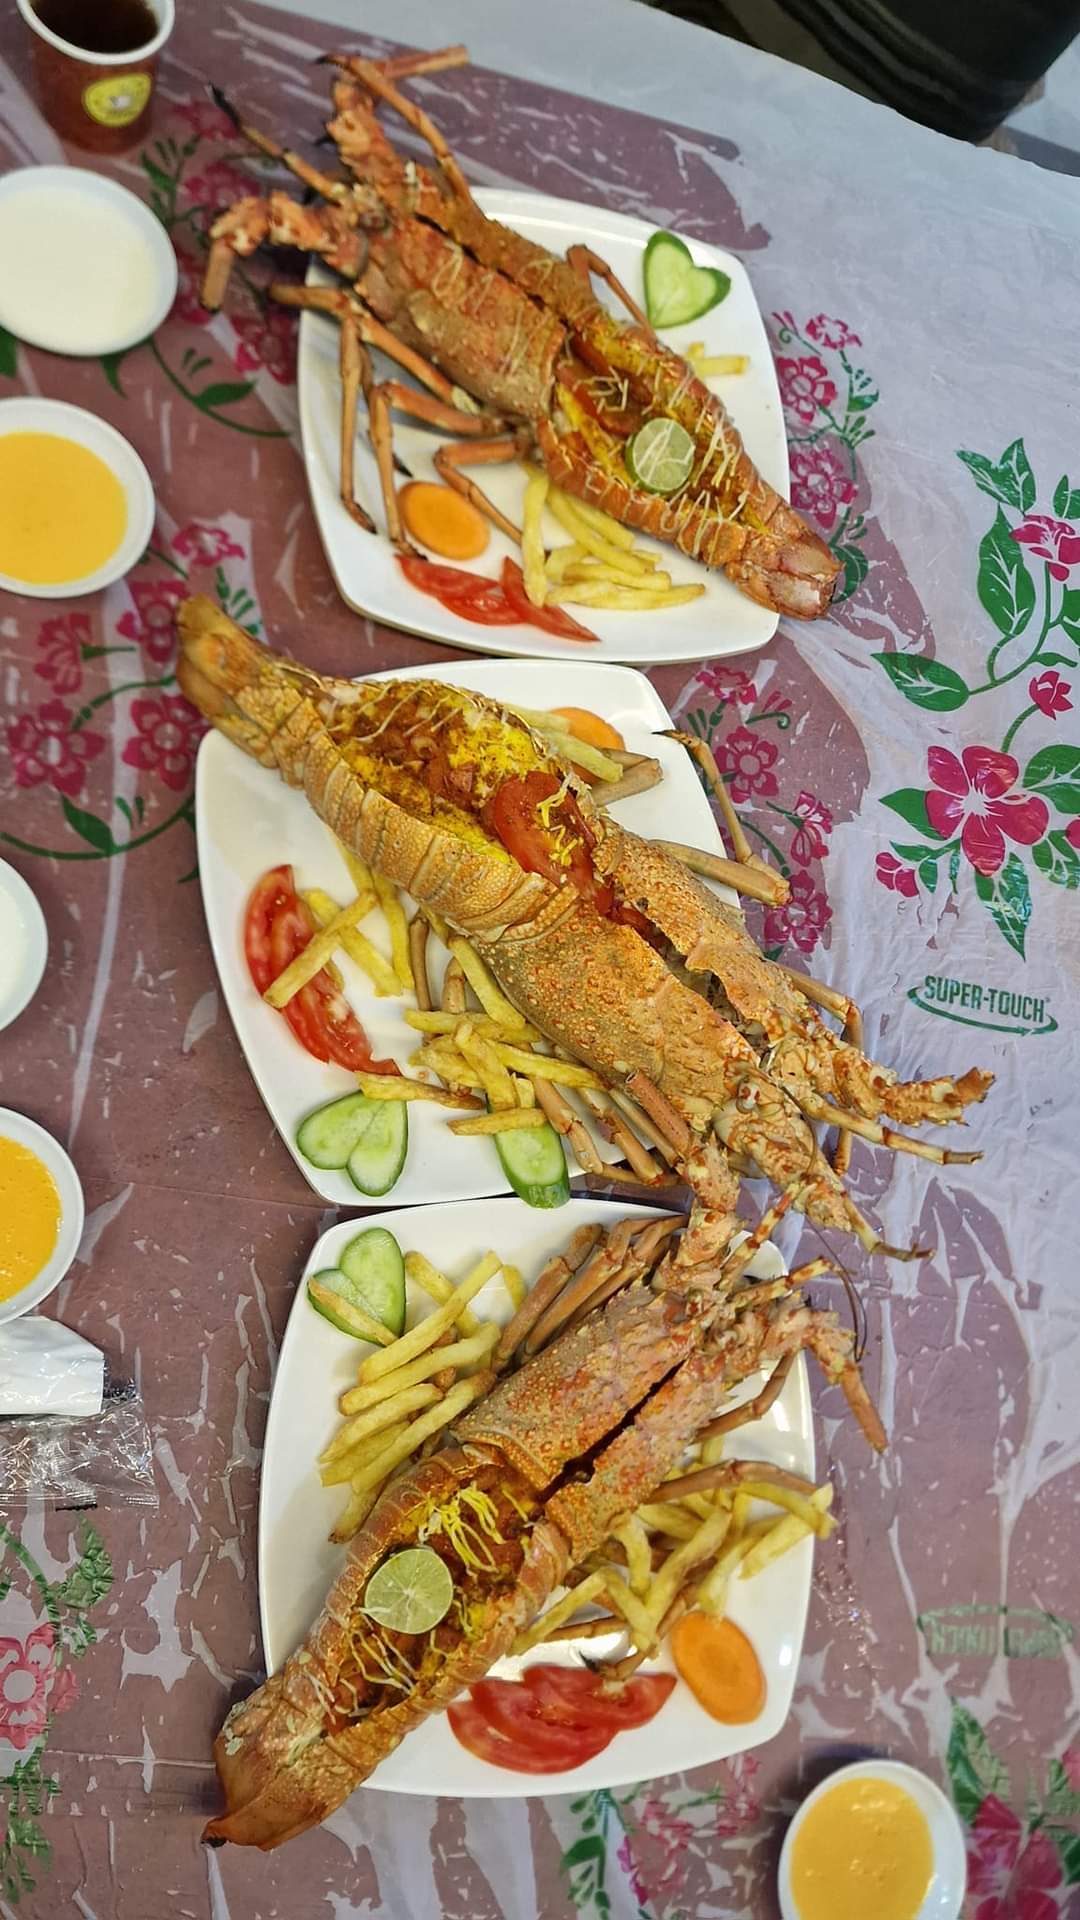 Our lobster dinner in Socotra